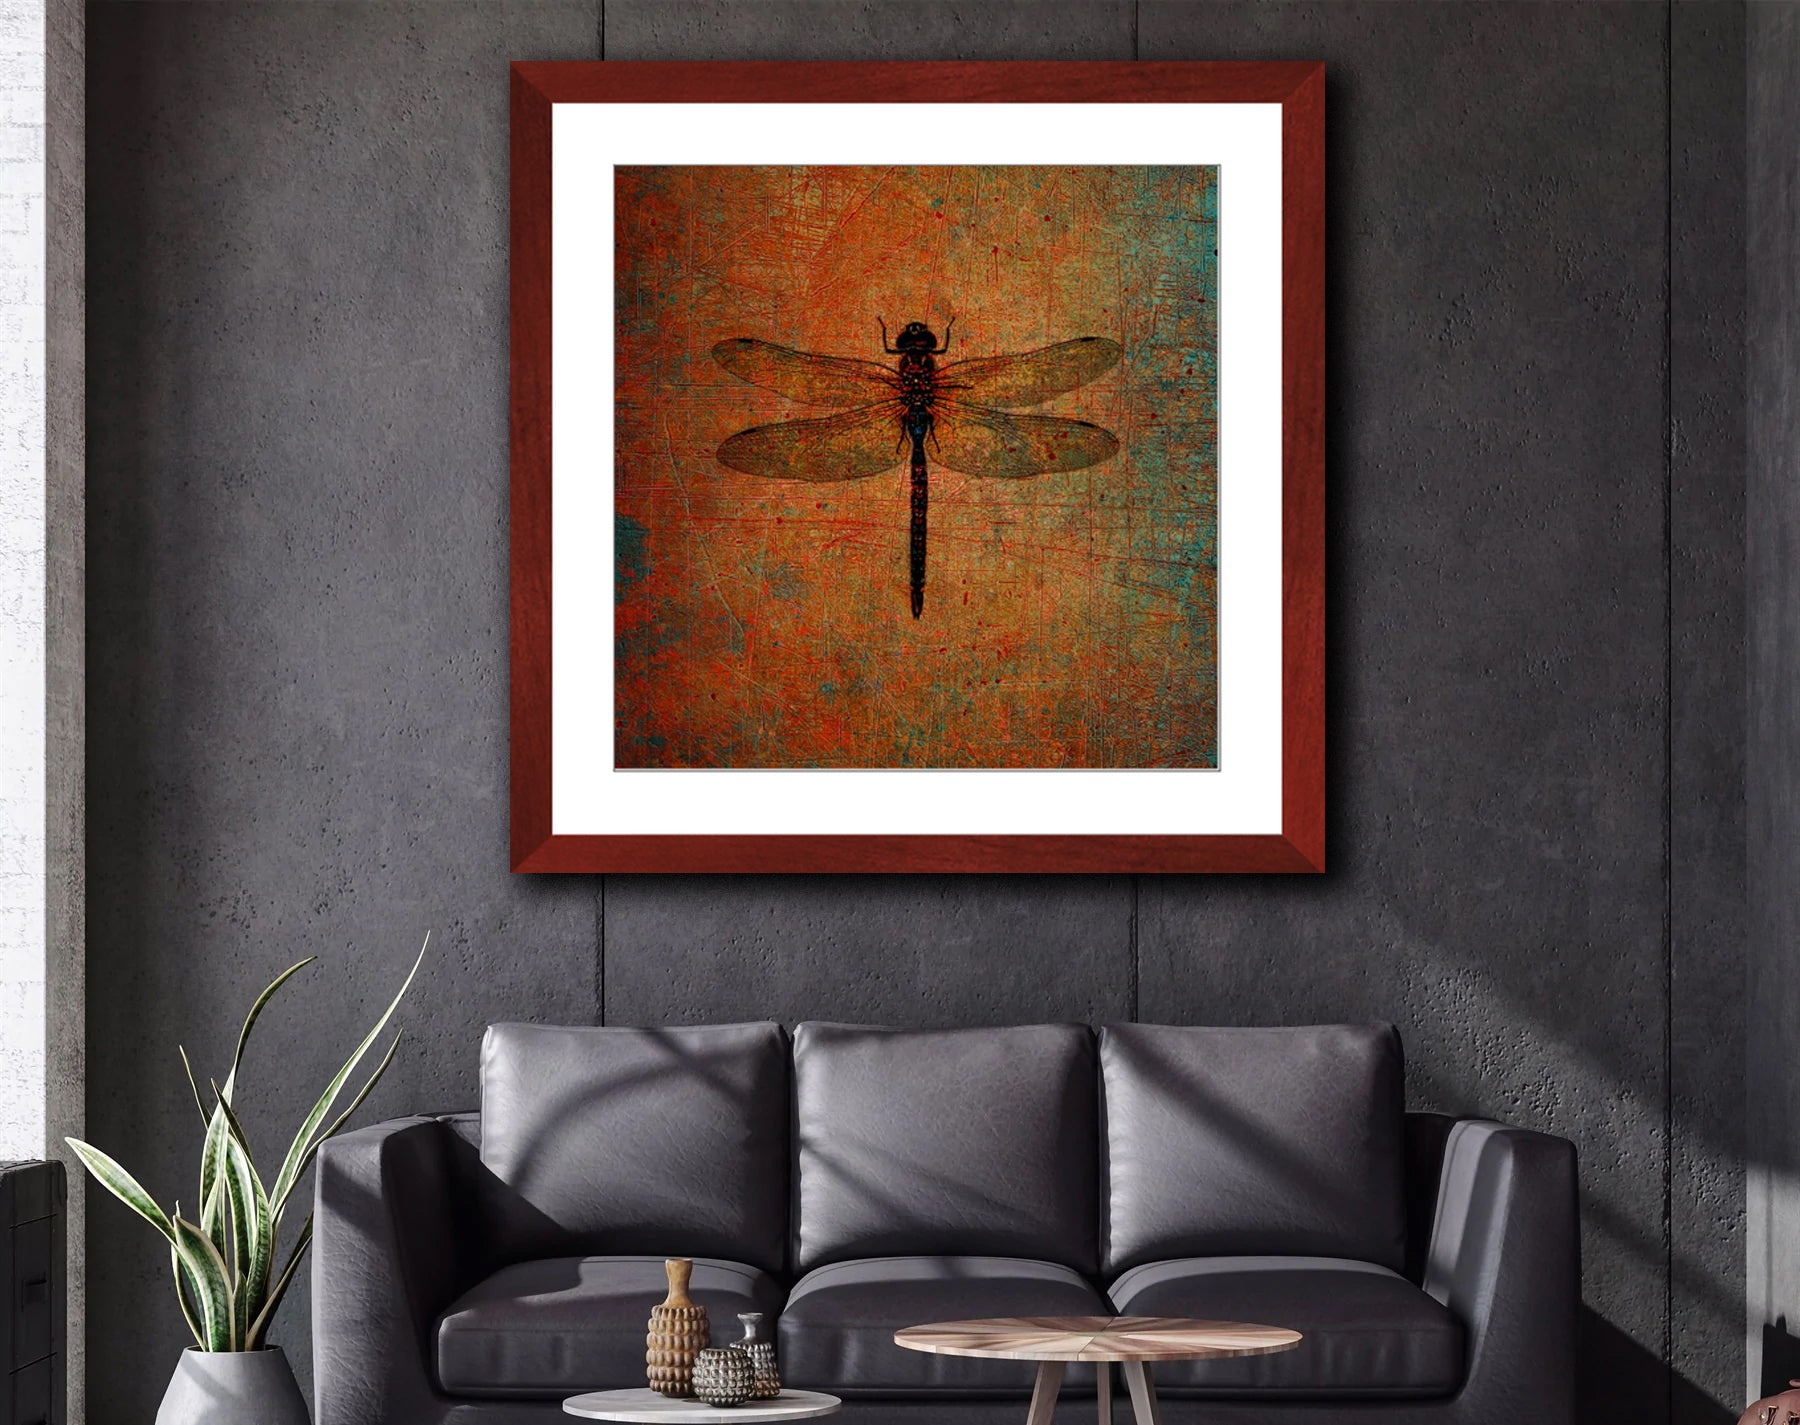 Dragonfly on Distressed Brown Background Framed in a Square Cherry Color Wood Frame hung